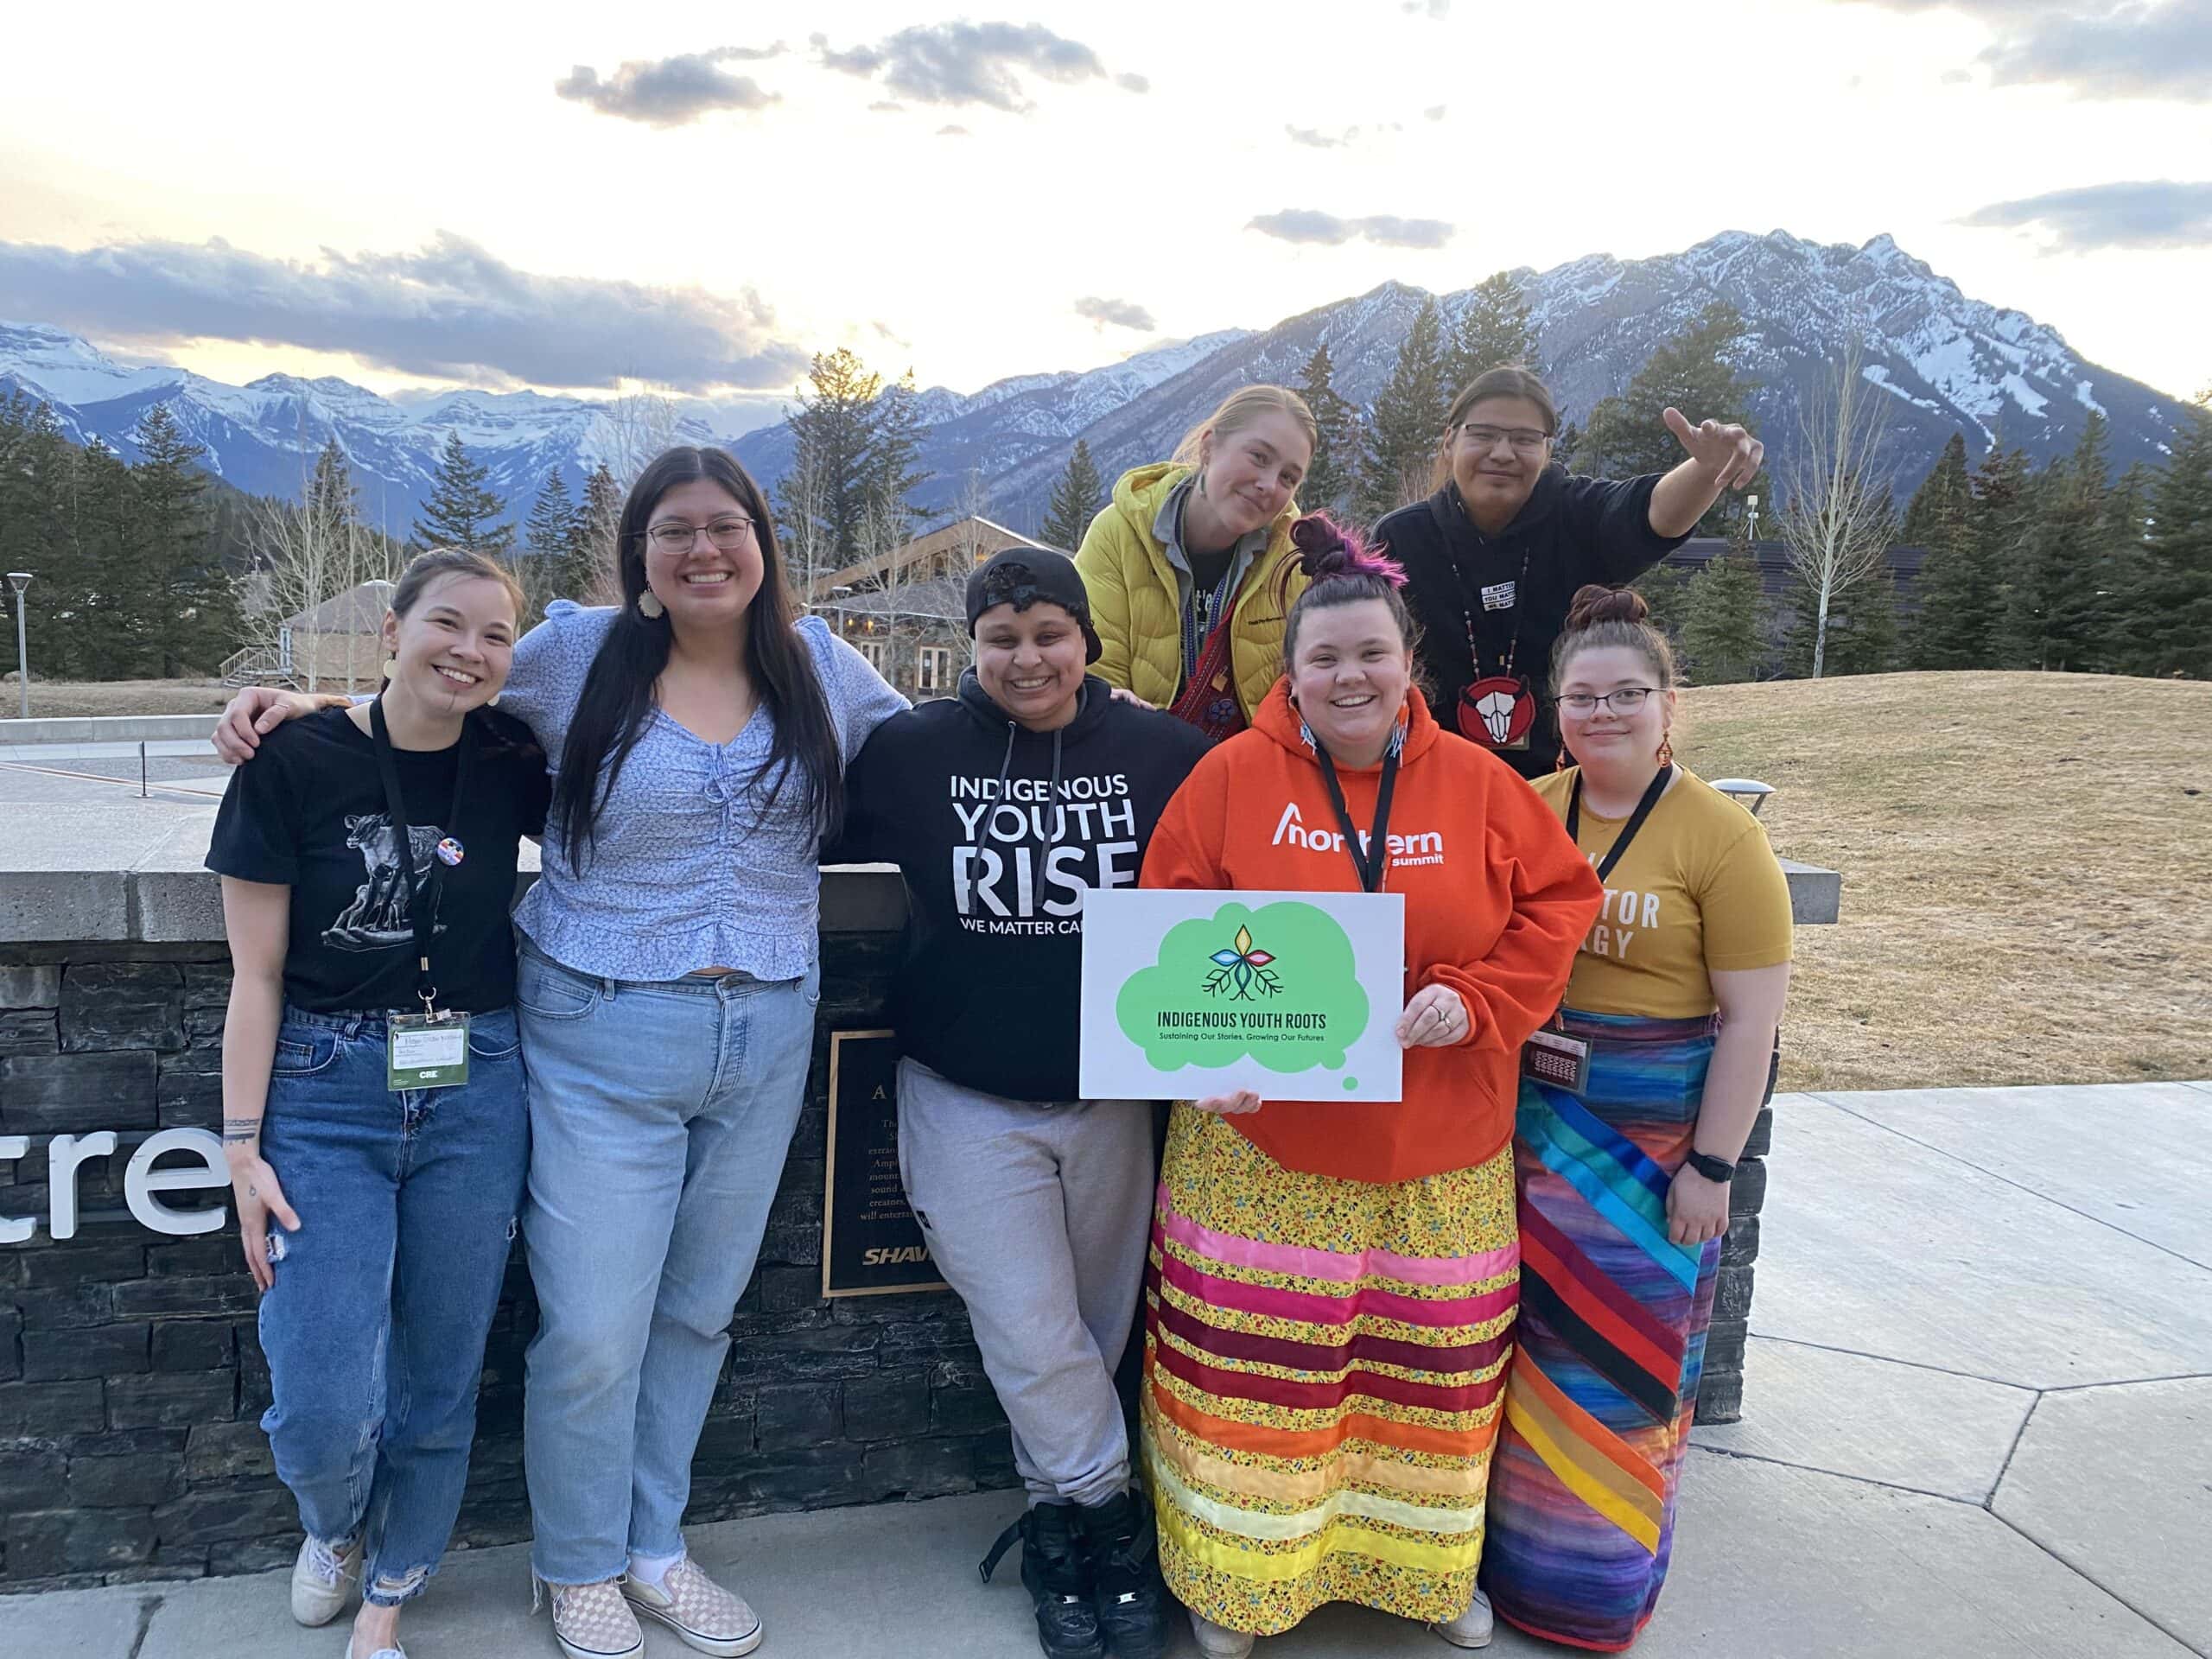 A group of Indigenous youth post for a photo in front of mountains in Banff.